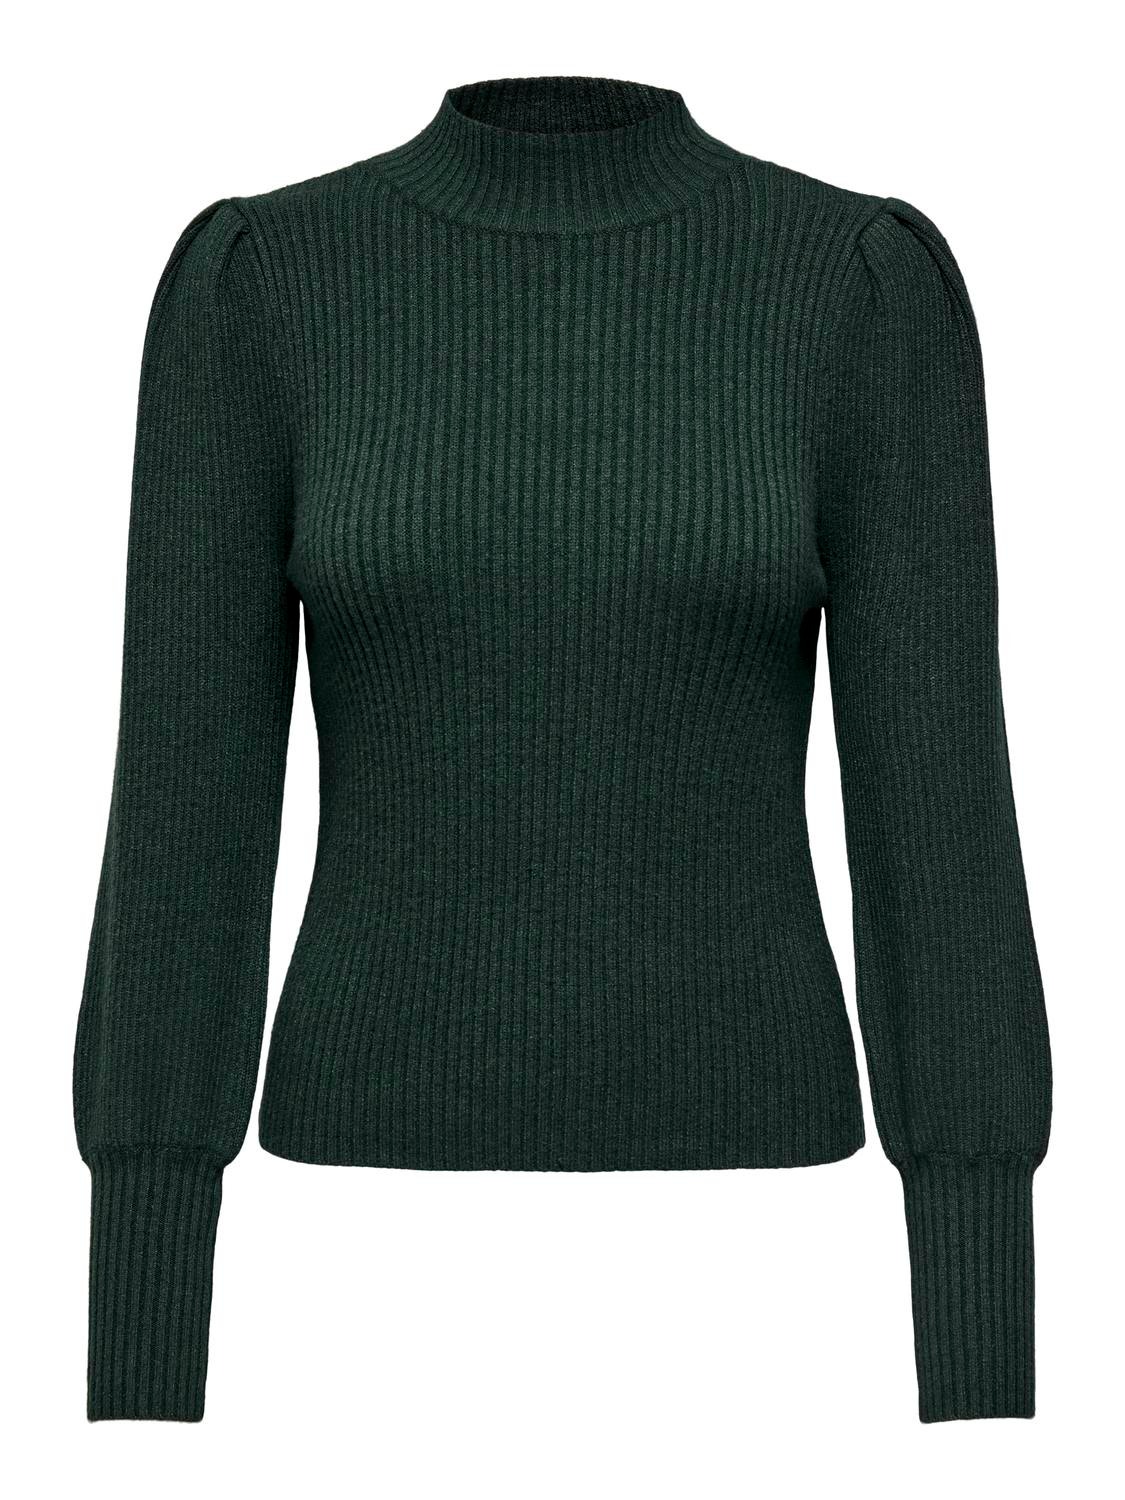 ONLY High neck Knitted Pullover -June Bug - 15232494